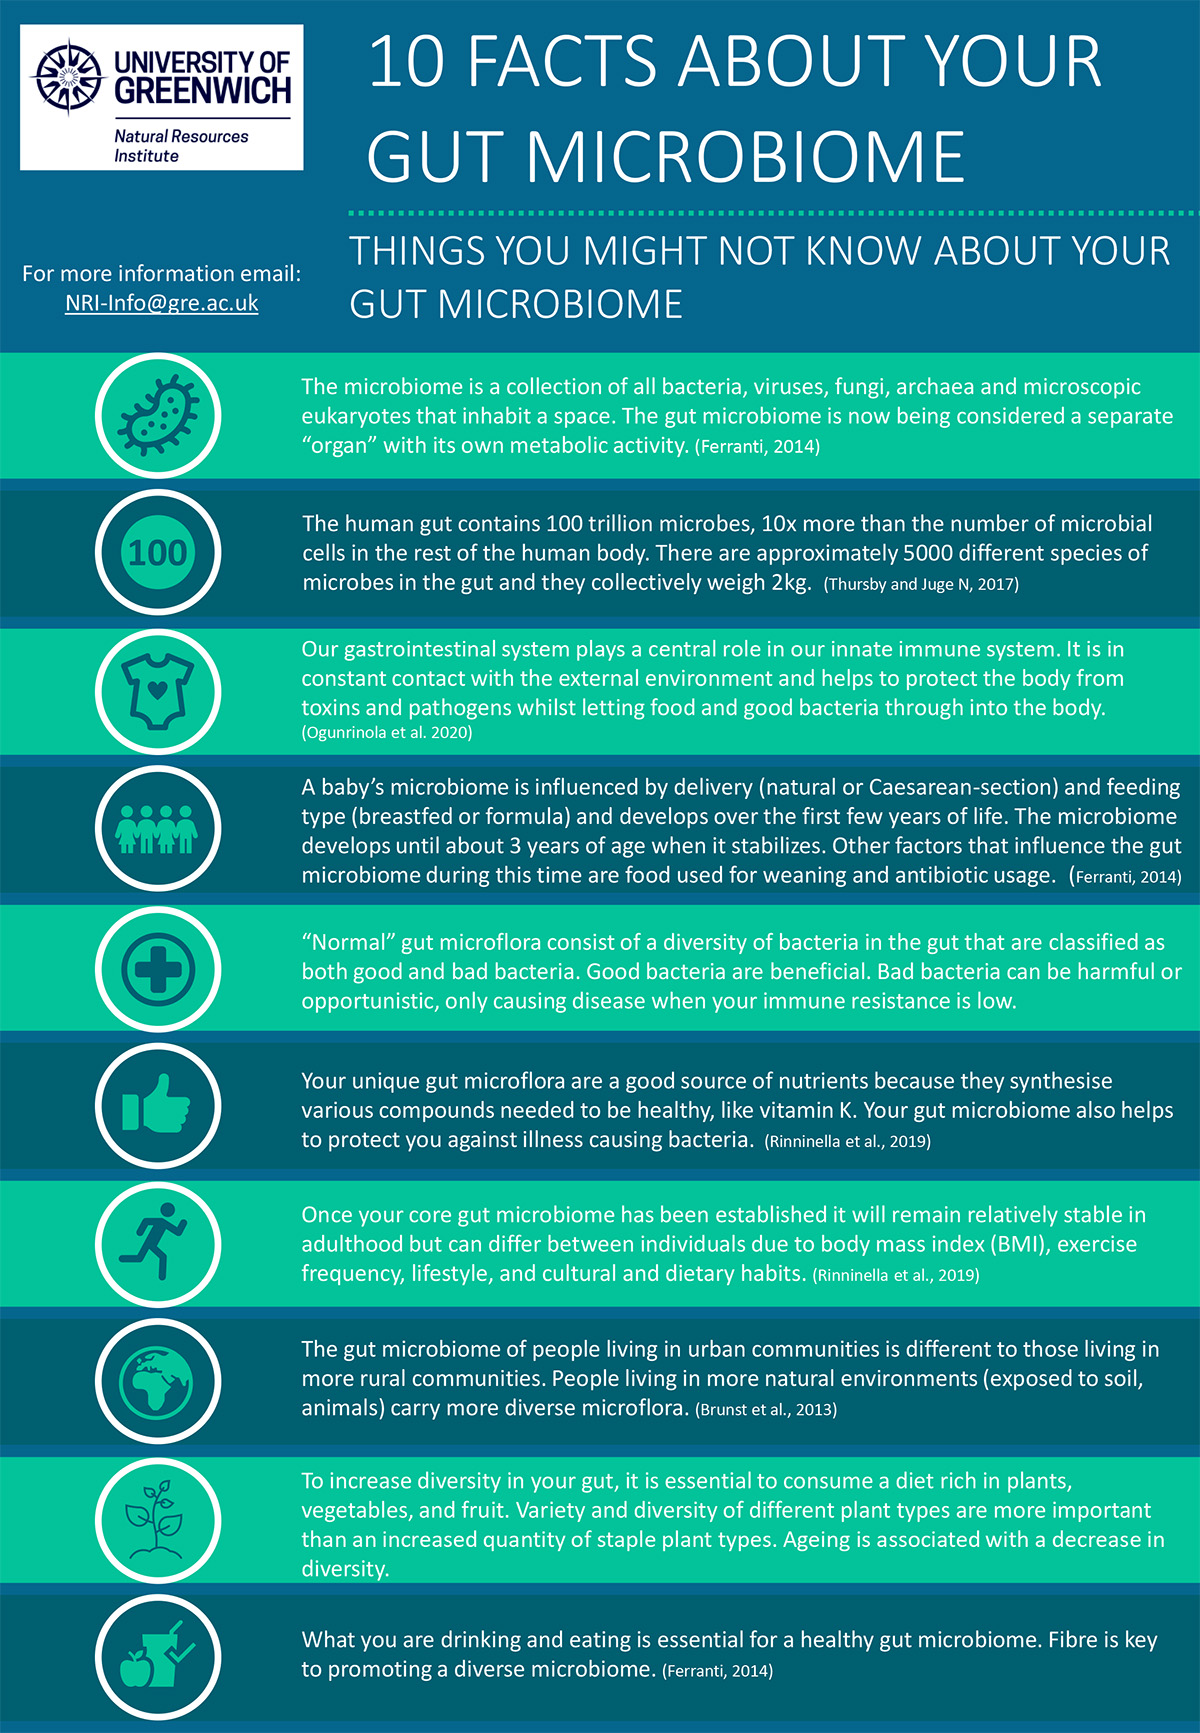 10 Facts about gut microbiome